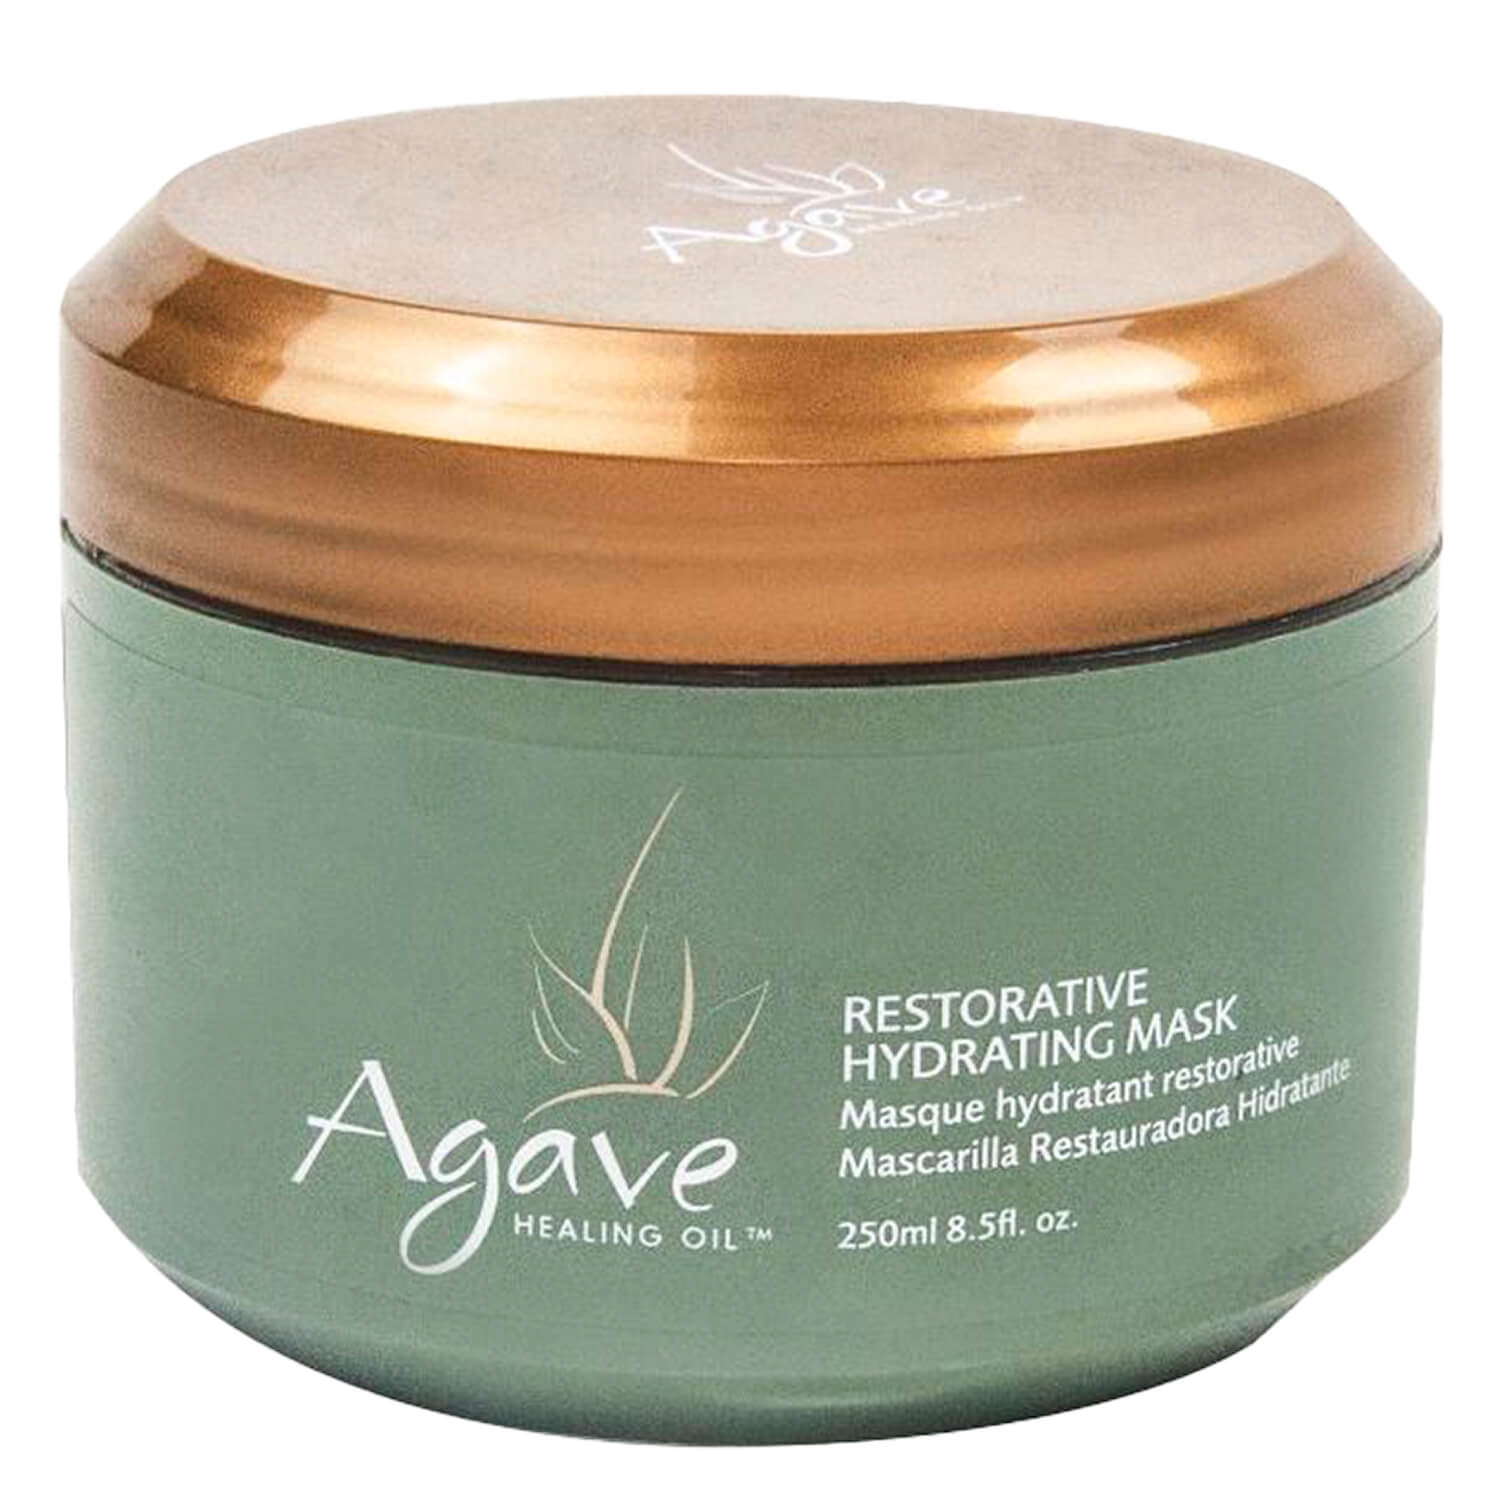 Product image from Agave - Restorative Hydrating Mask